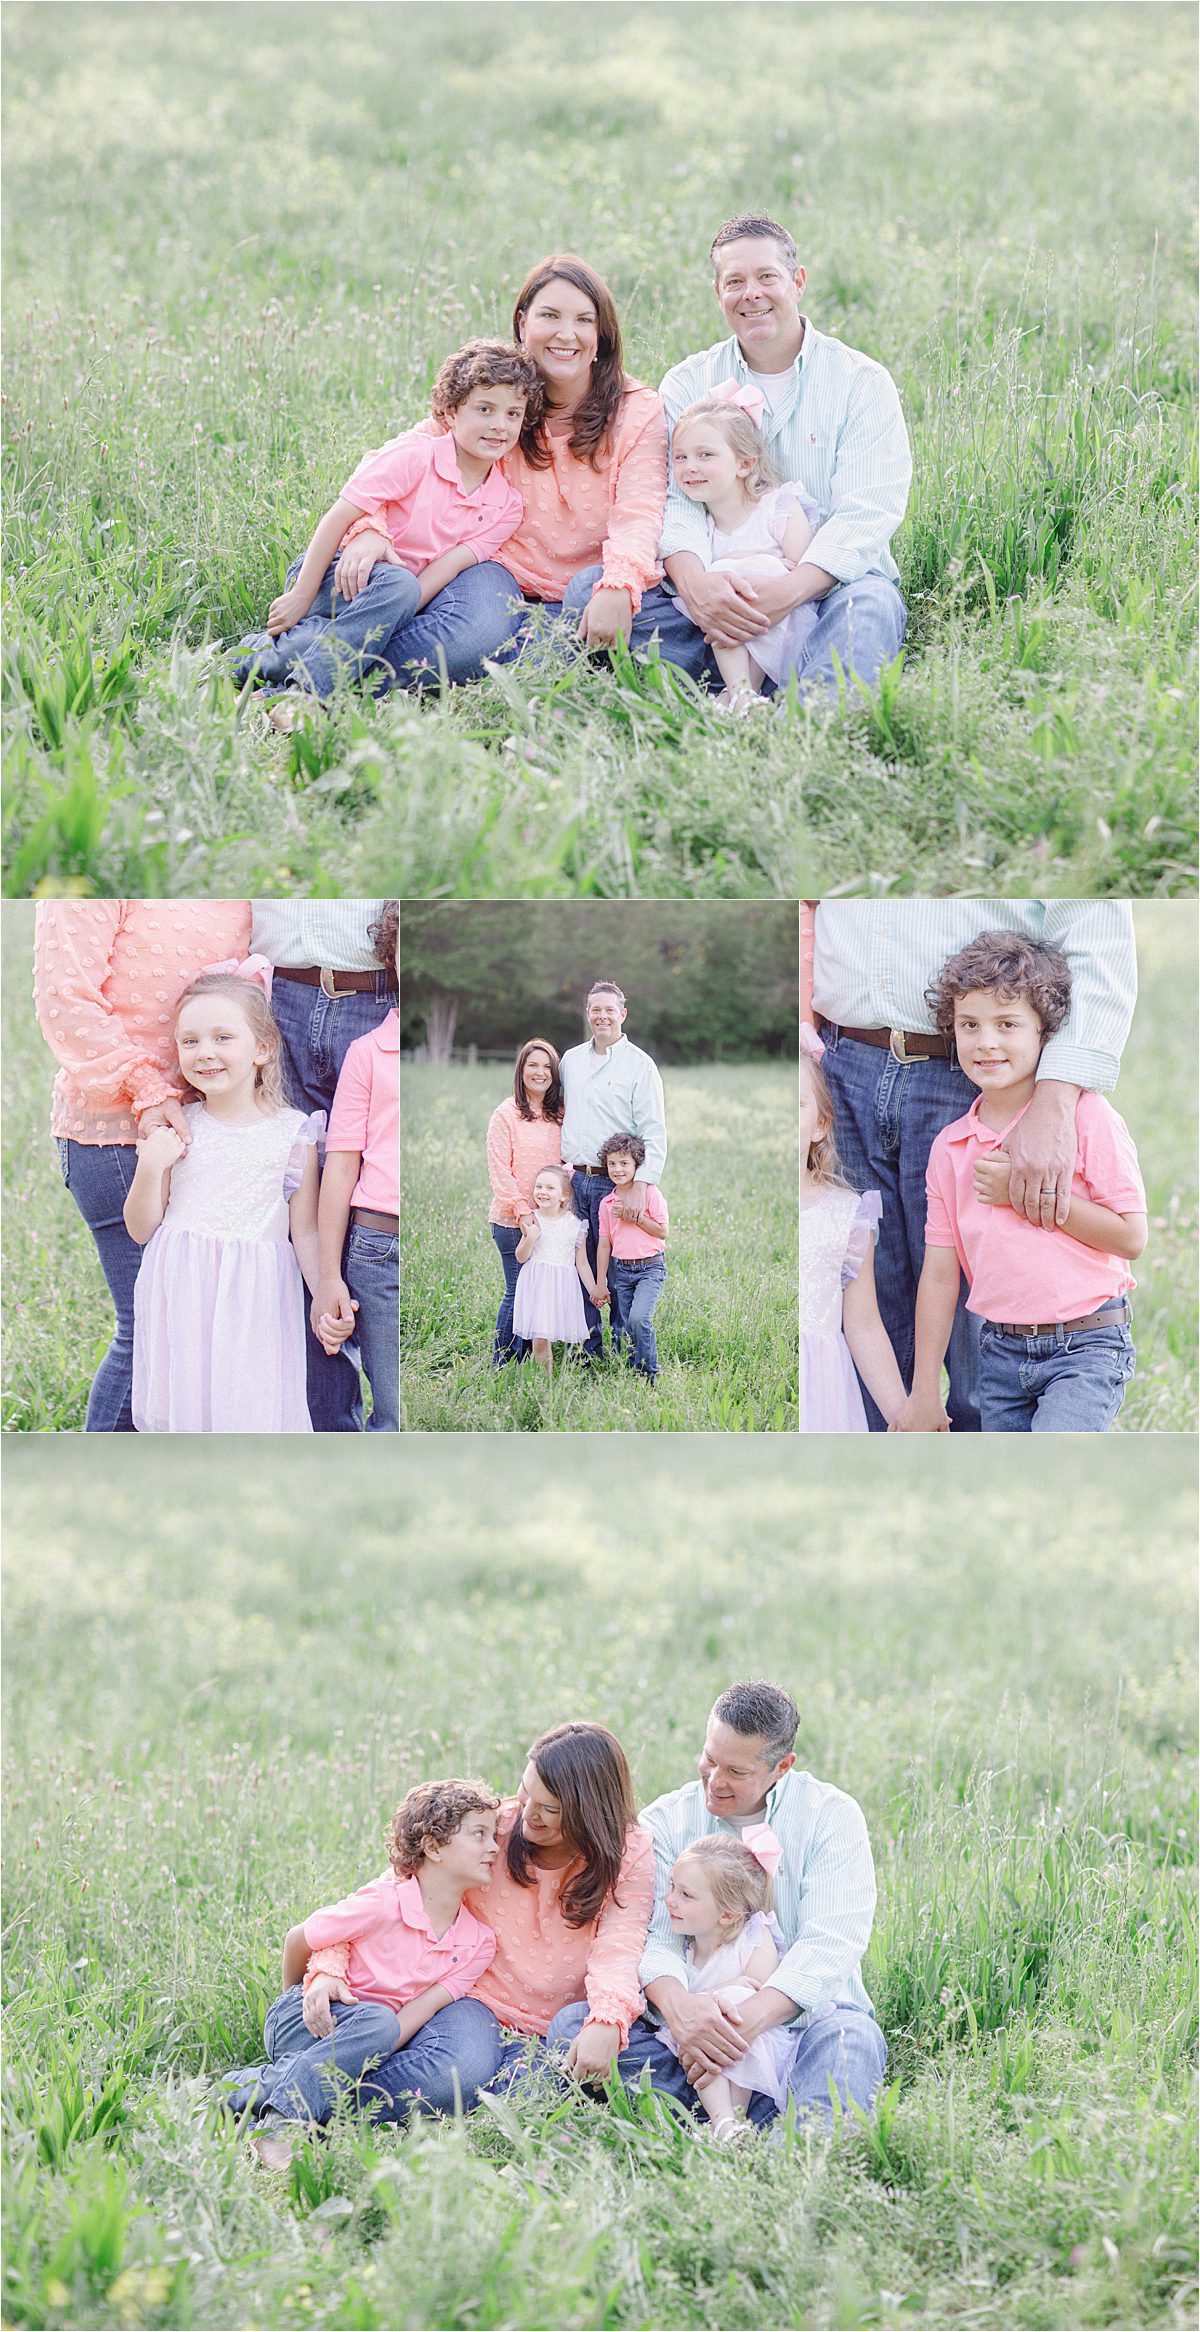 Athens, GA spring family pictures in a field with wildflowers.